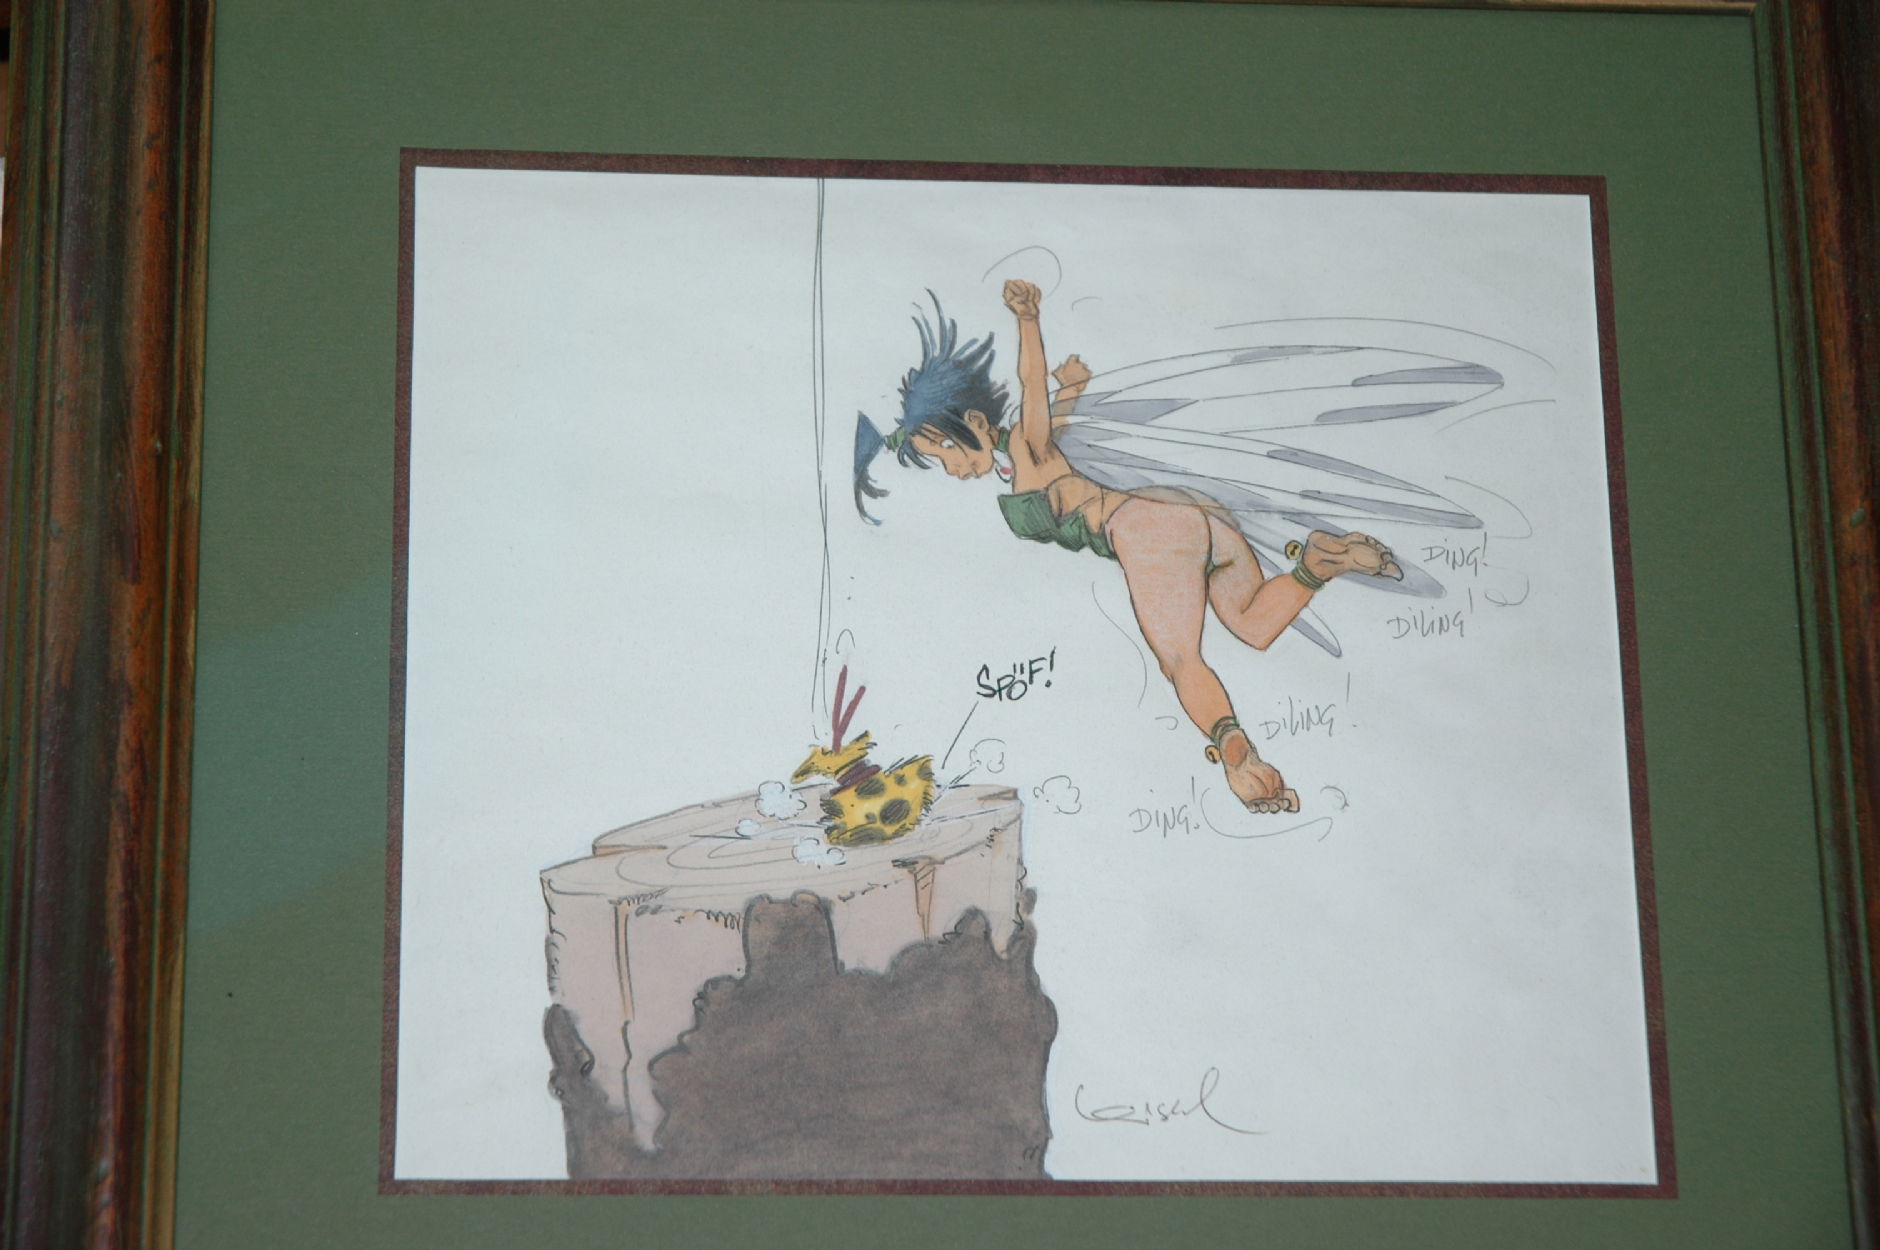 Loisel Peter Pan Original Drawing for a Clochette (Tinkerbell